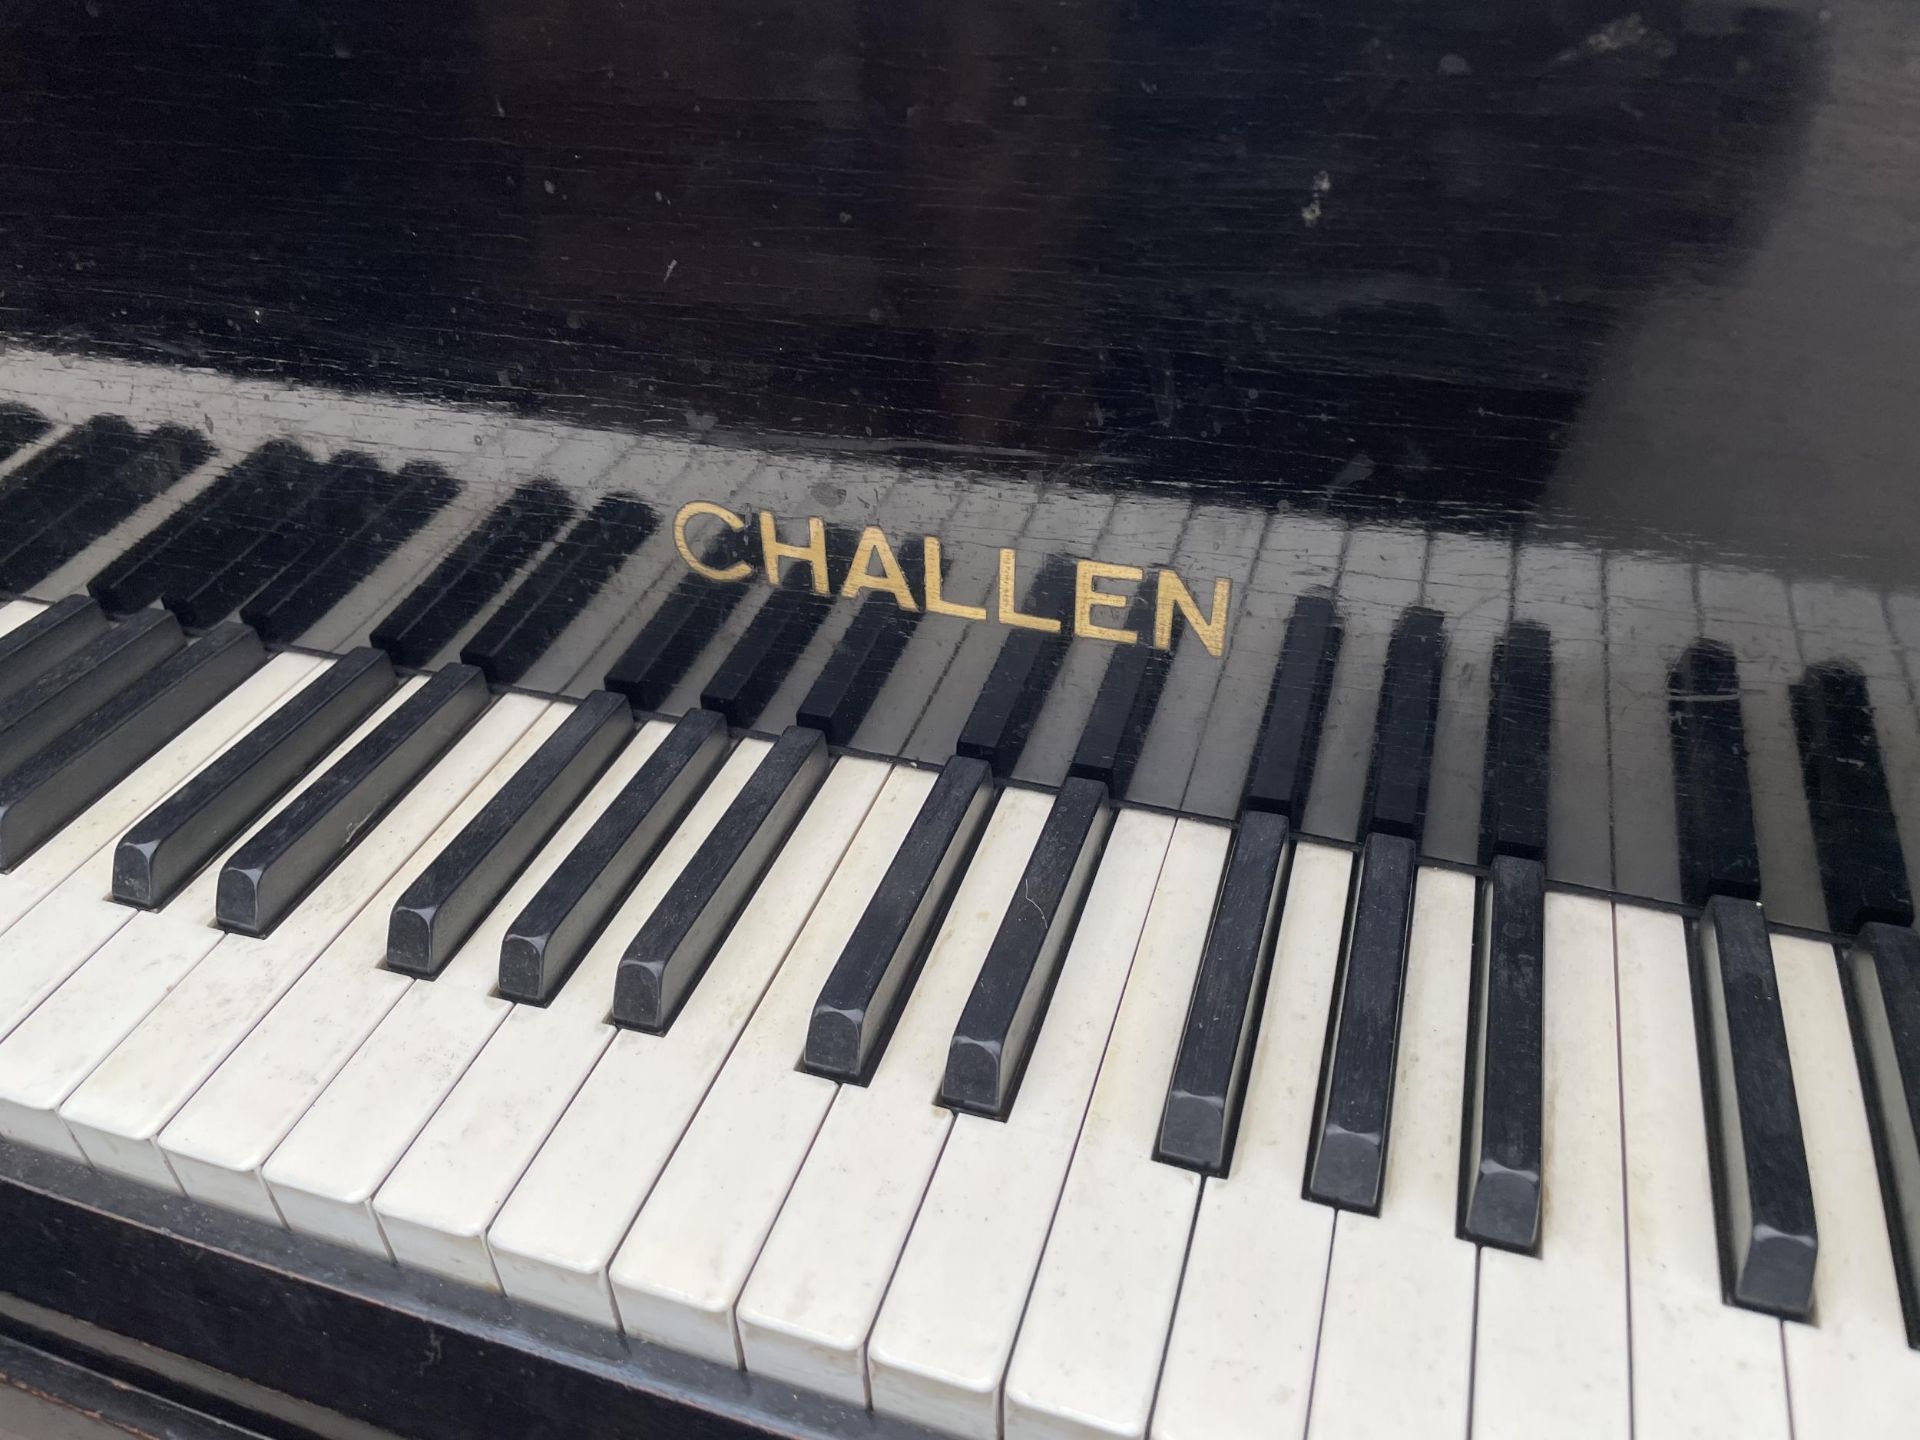 AN EBONISED CHALLEN BABY GRAND PIANO (CHALLEN LONDON EST 1804), 53" IN LENGTH - Image 3 of 4